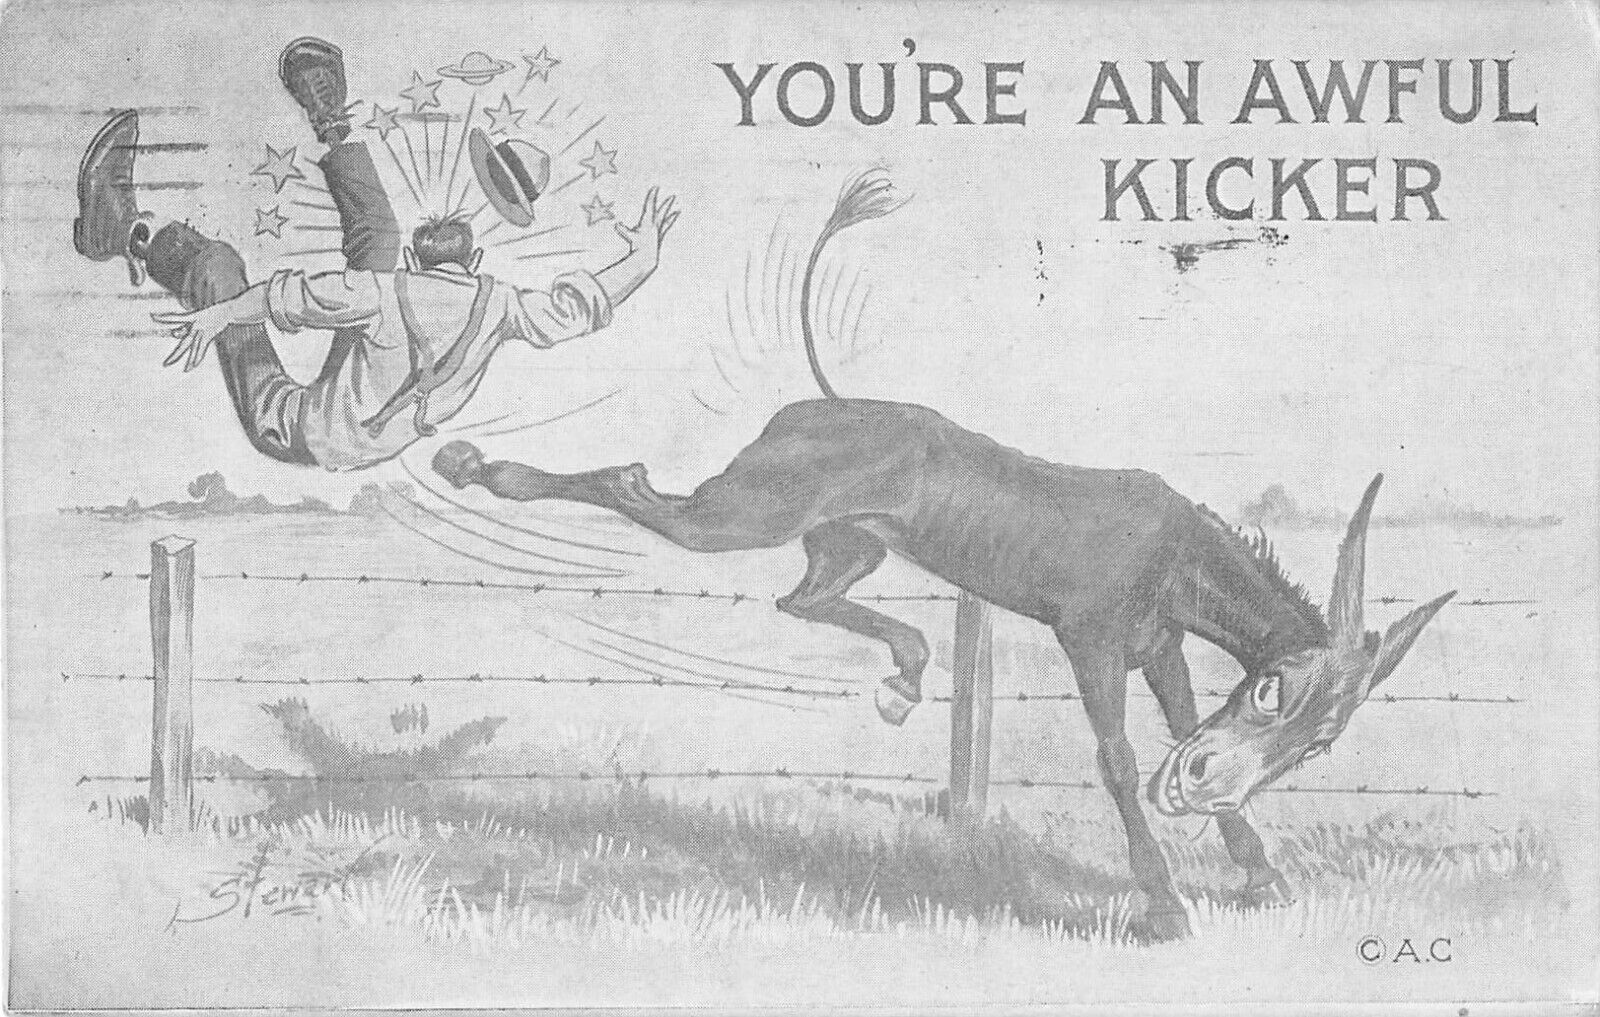 1913 Comic PC-Donkey Kicks Farmer Over Barbed Wire Fence-You're An Awful Kicker